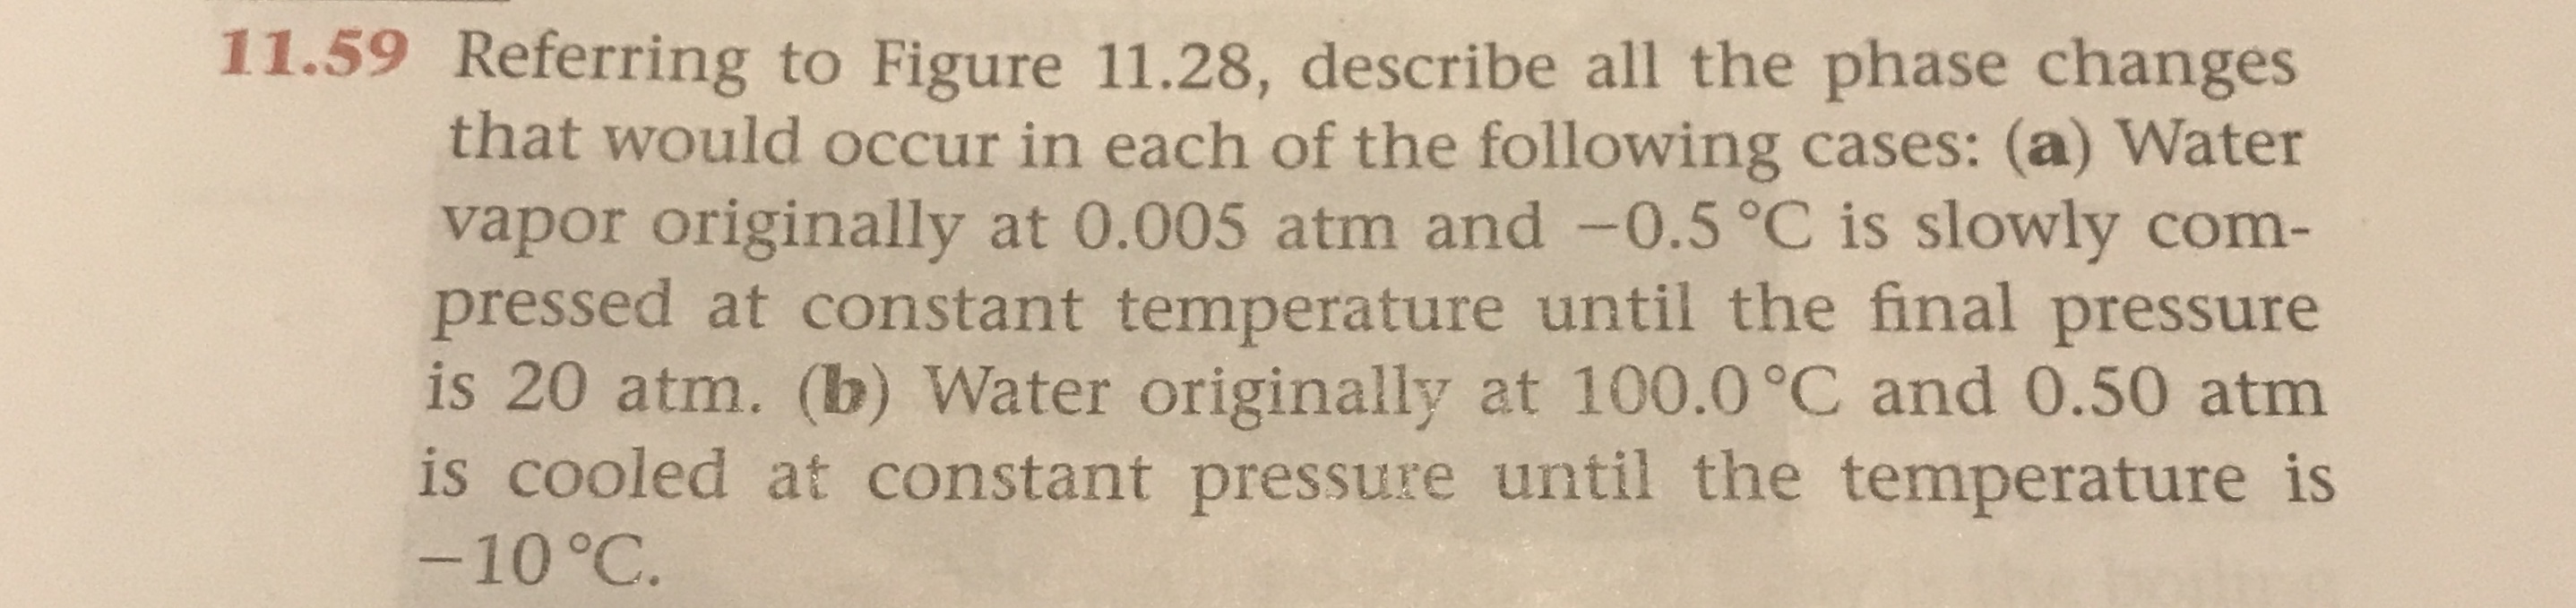 11.59 Referring to Figure 11.28, describe all the phase changes
that would occur in each of the following cases: (a) Water
vapor originally at 0.005 atm and -0.5°C is slowly com-
pressed at constant temperature until the final pressure
is 20 atm. (b) Water originally at 100.0 °C and 0.50 atm
is cooled at constant pressure until the temperature is
-10 °C.
